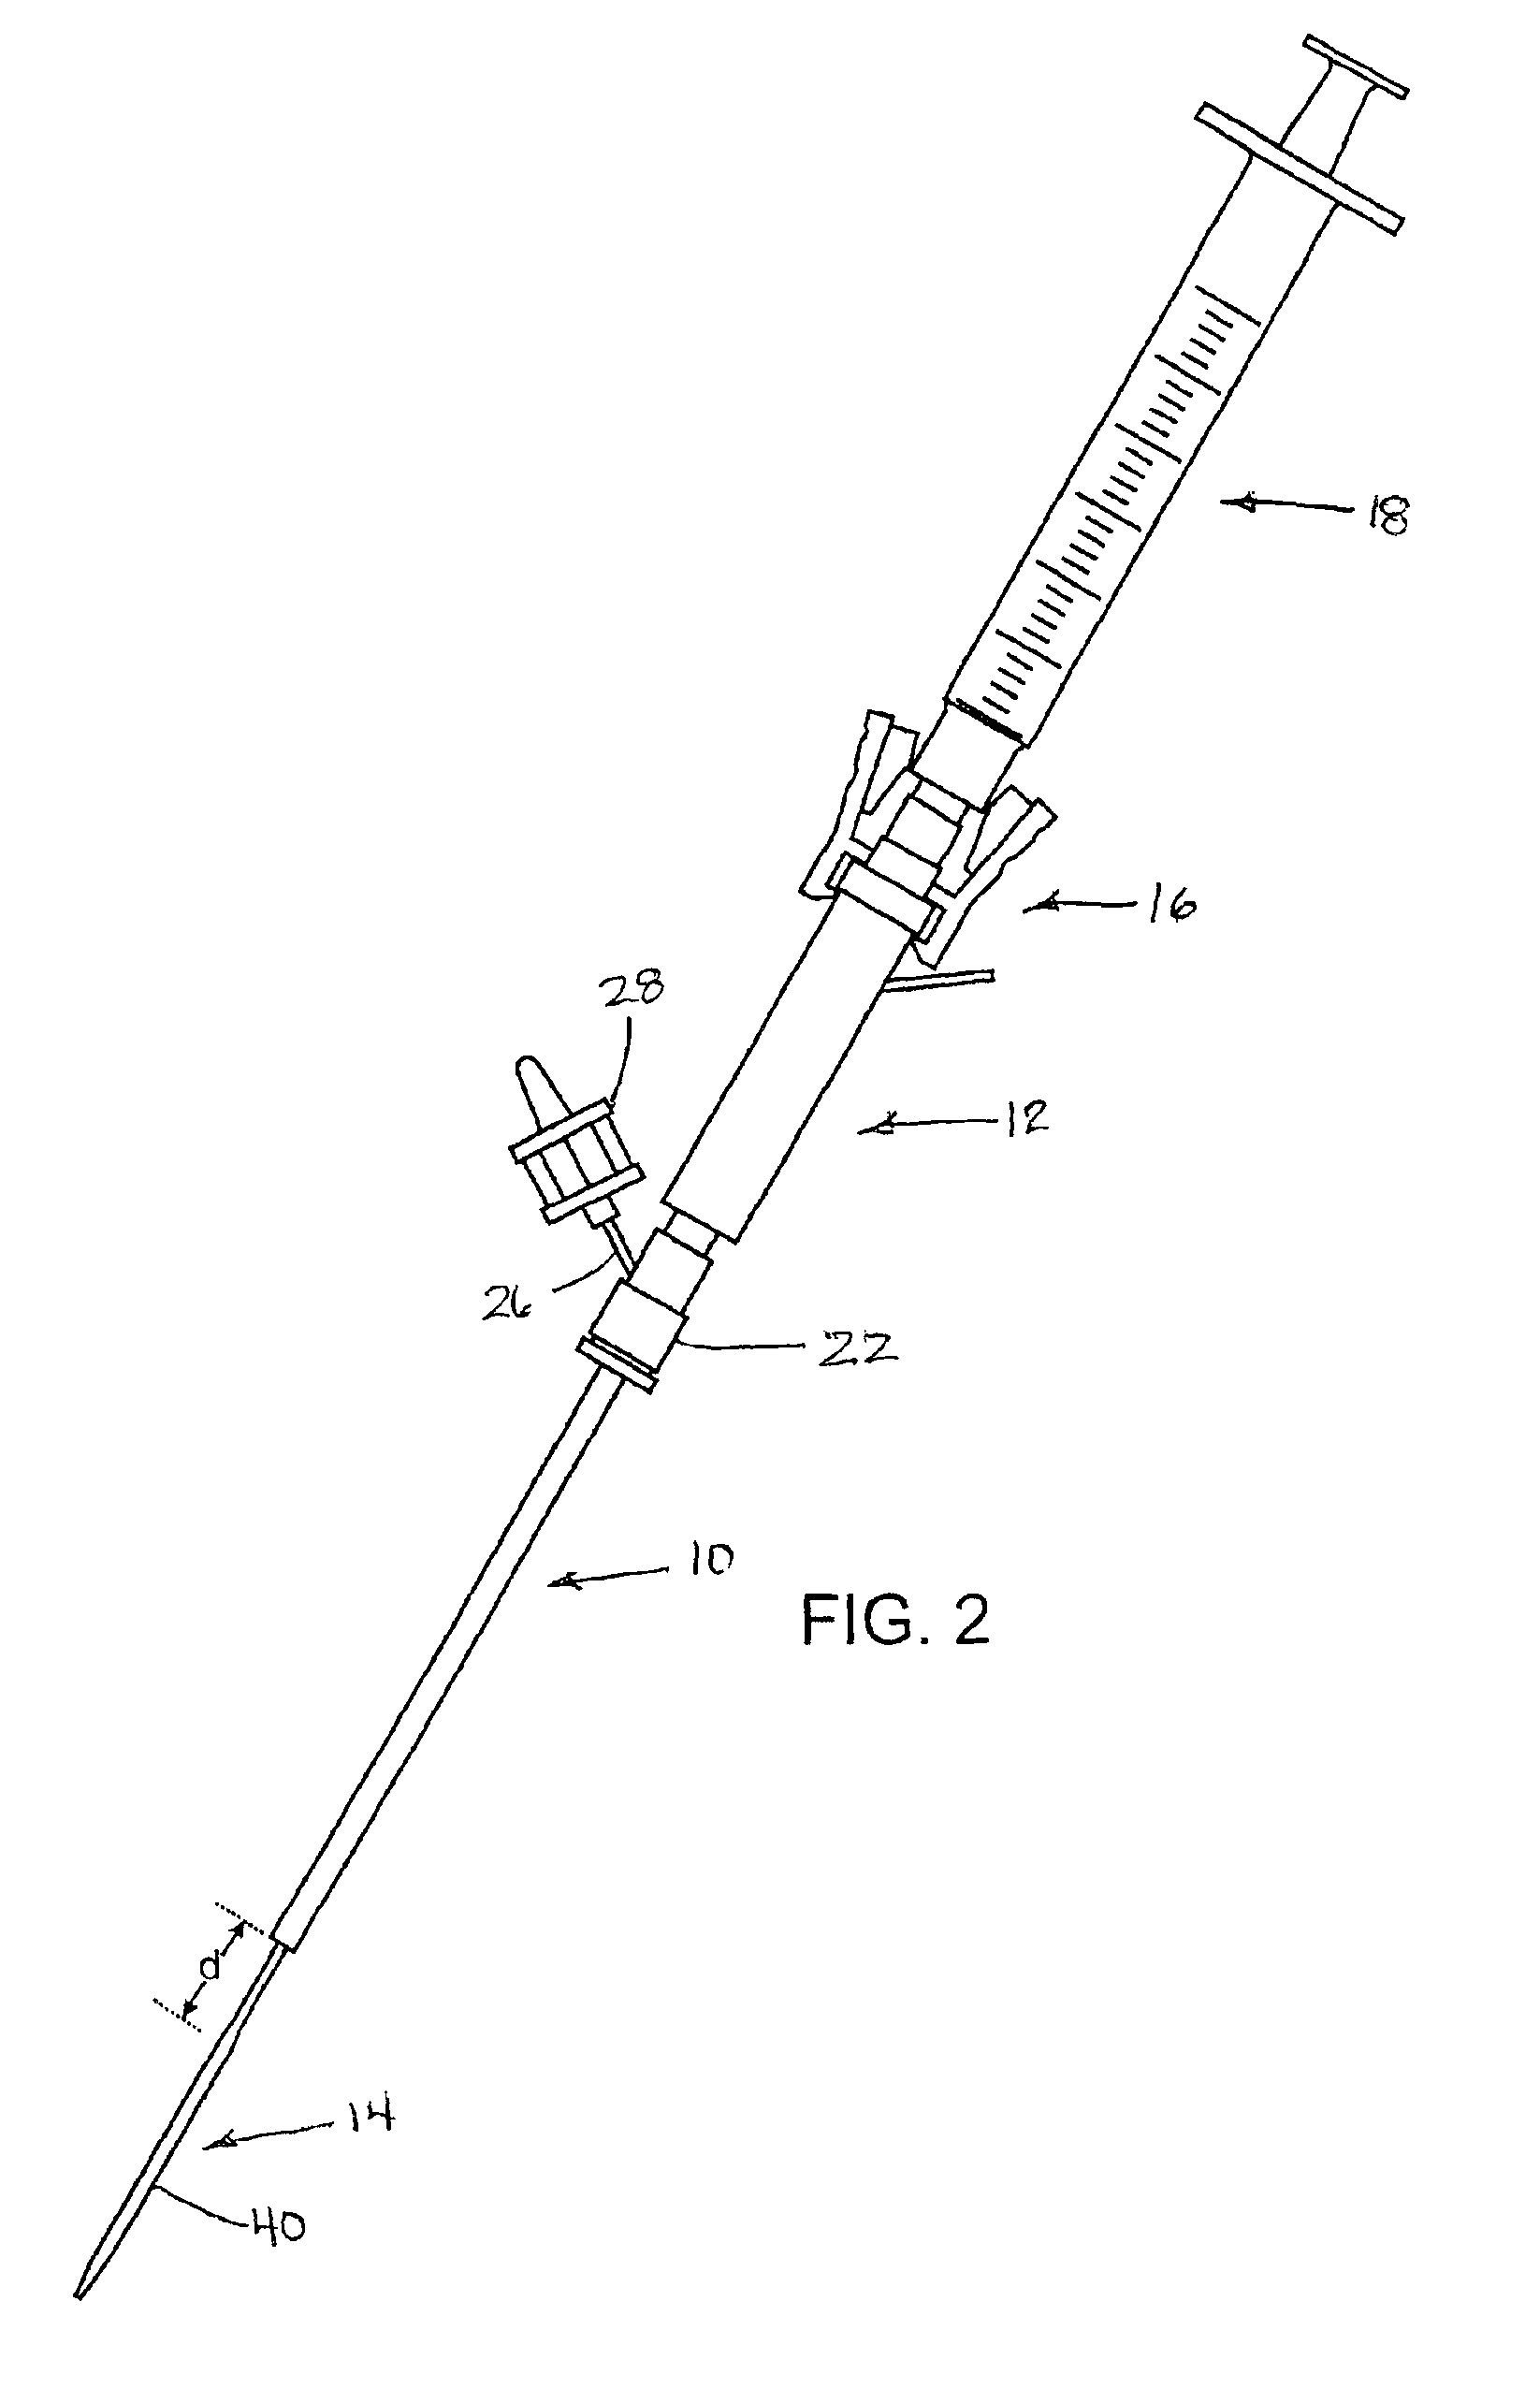 System and method for delivering hemostasis promoting material to a blood vessel puncture site by fluid pressure